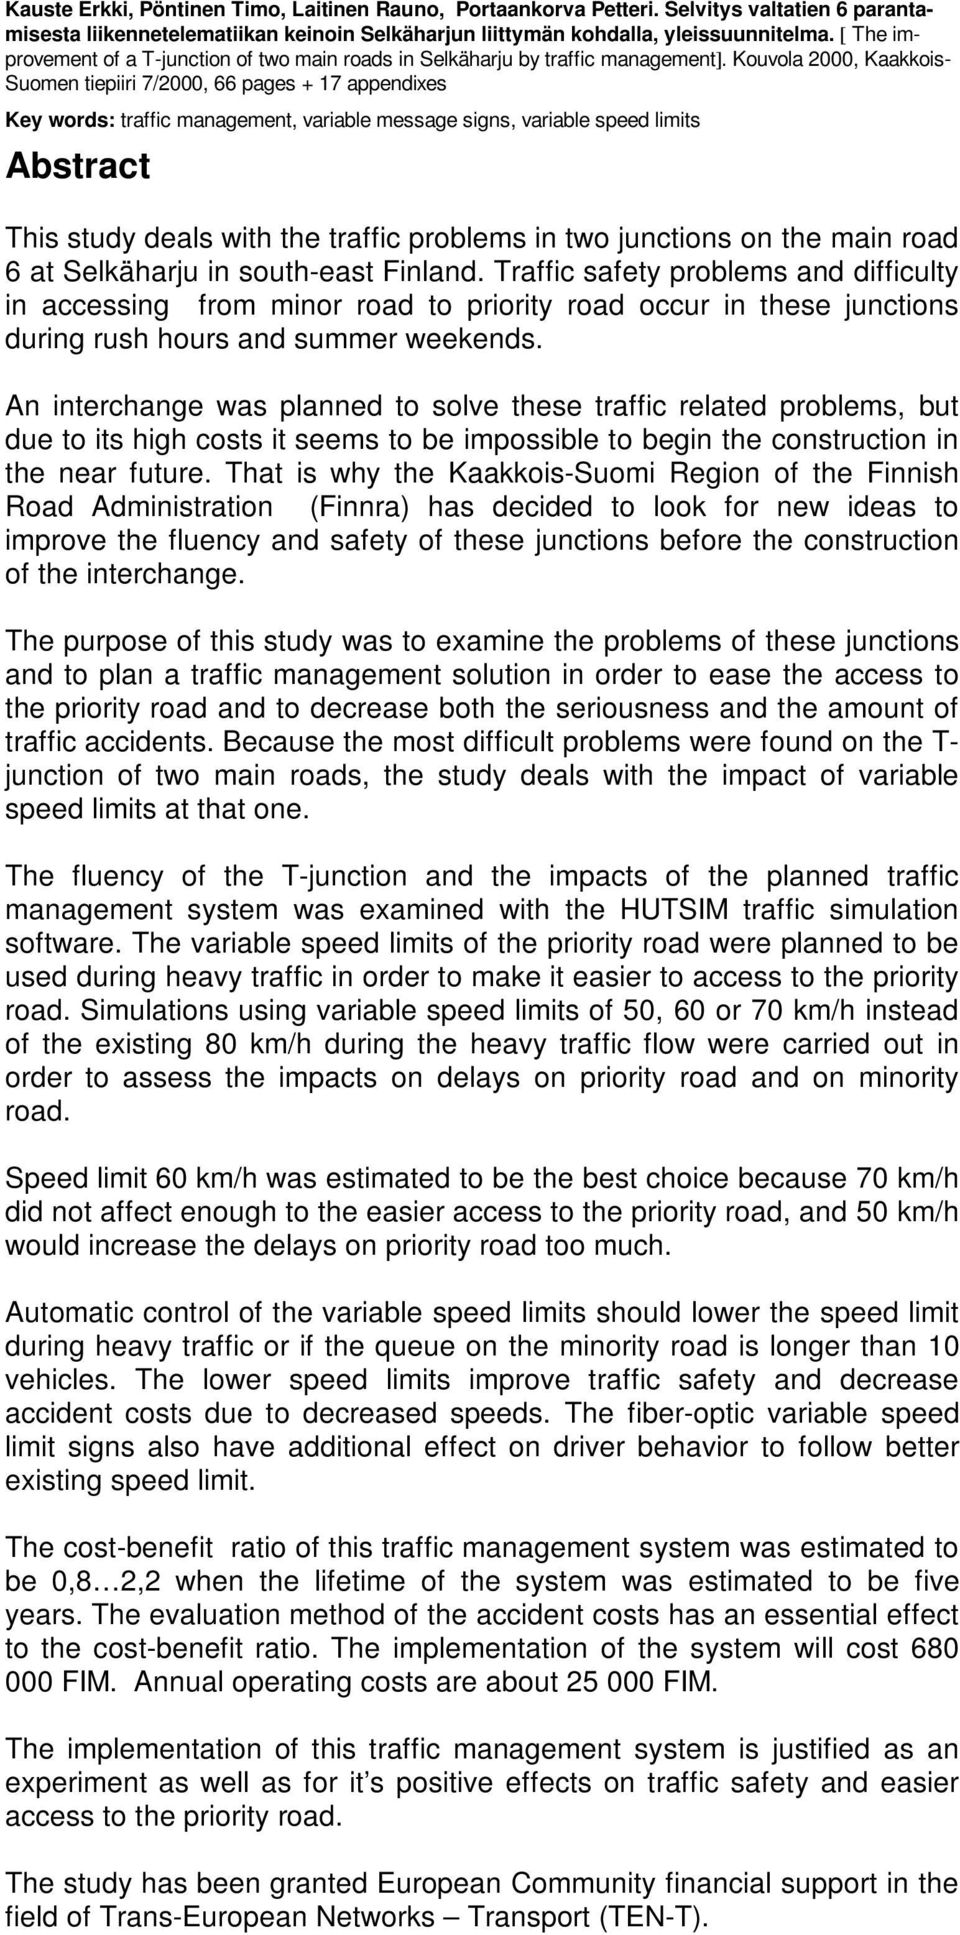 Kouvola 2000, Kaakkois- Suomen tiepiiri 7/2000, 66 pages + 17 appendixes Key words: traffic management, variable message signs, variable speed limits Abstract This study deals with the traffic